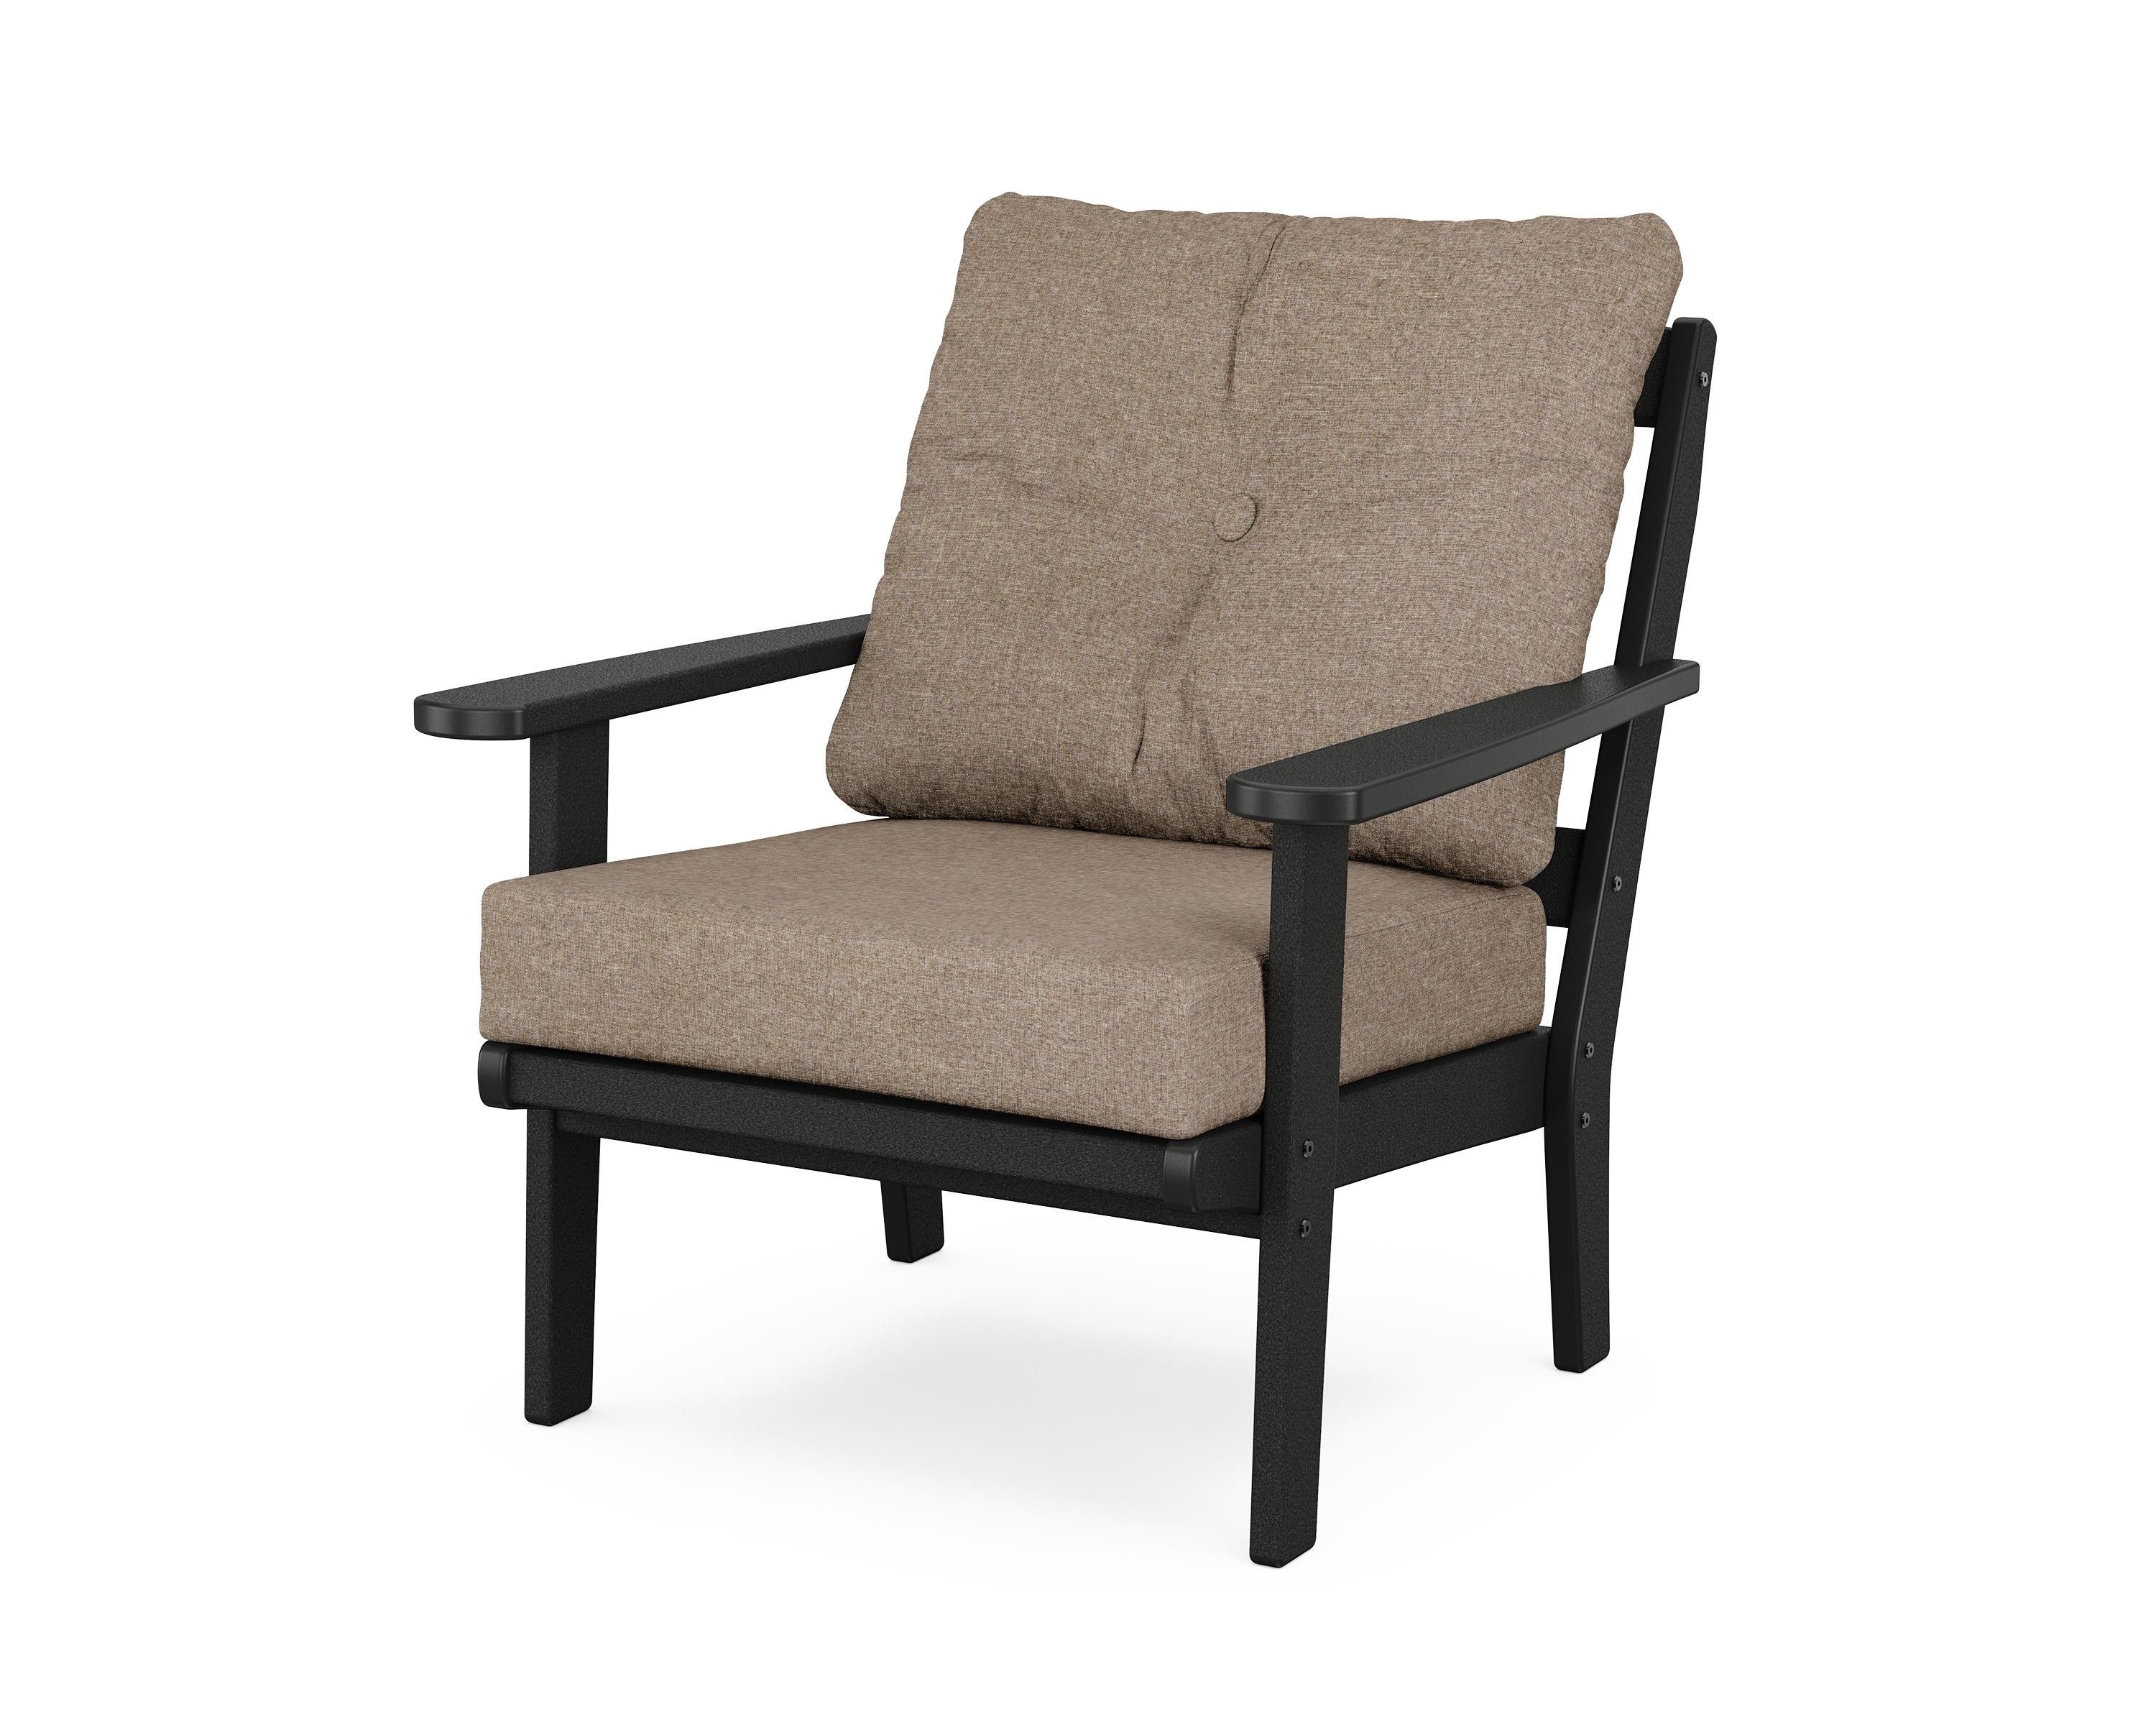 Trex Outdoor Furniture Cape Cod Deep Seating Chair